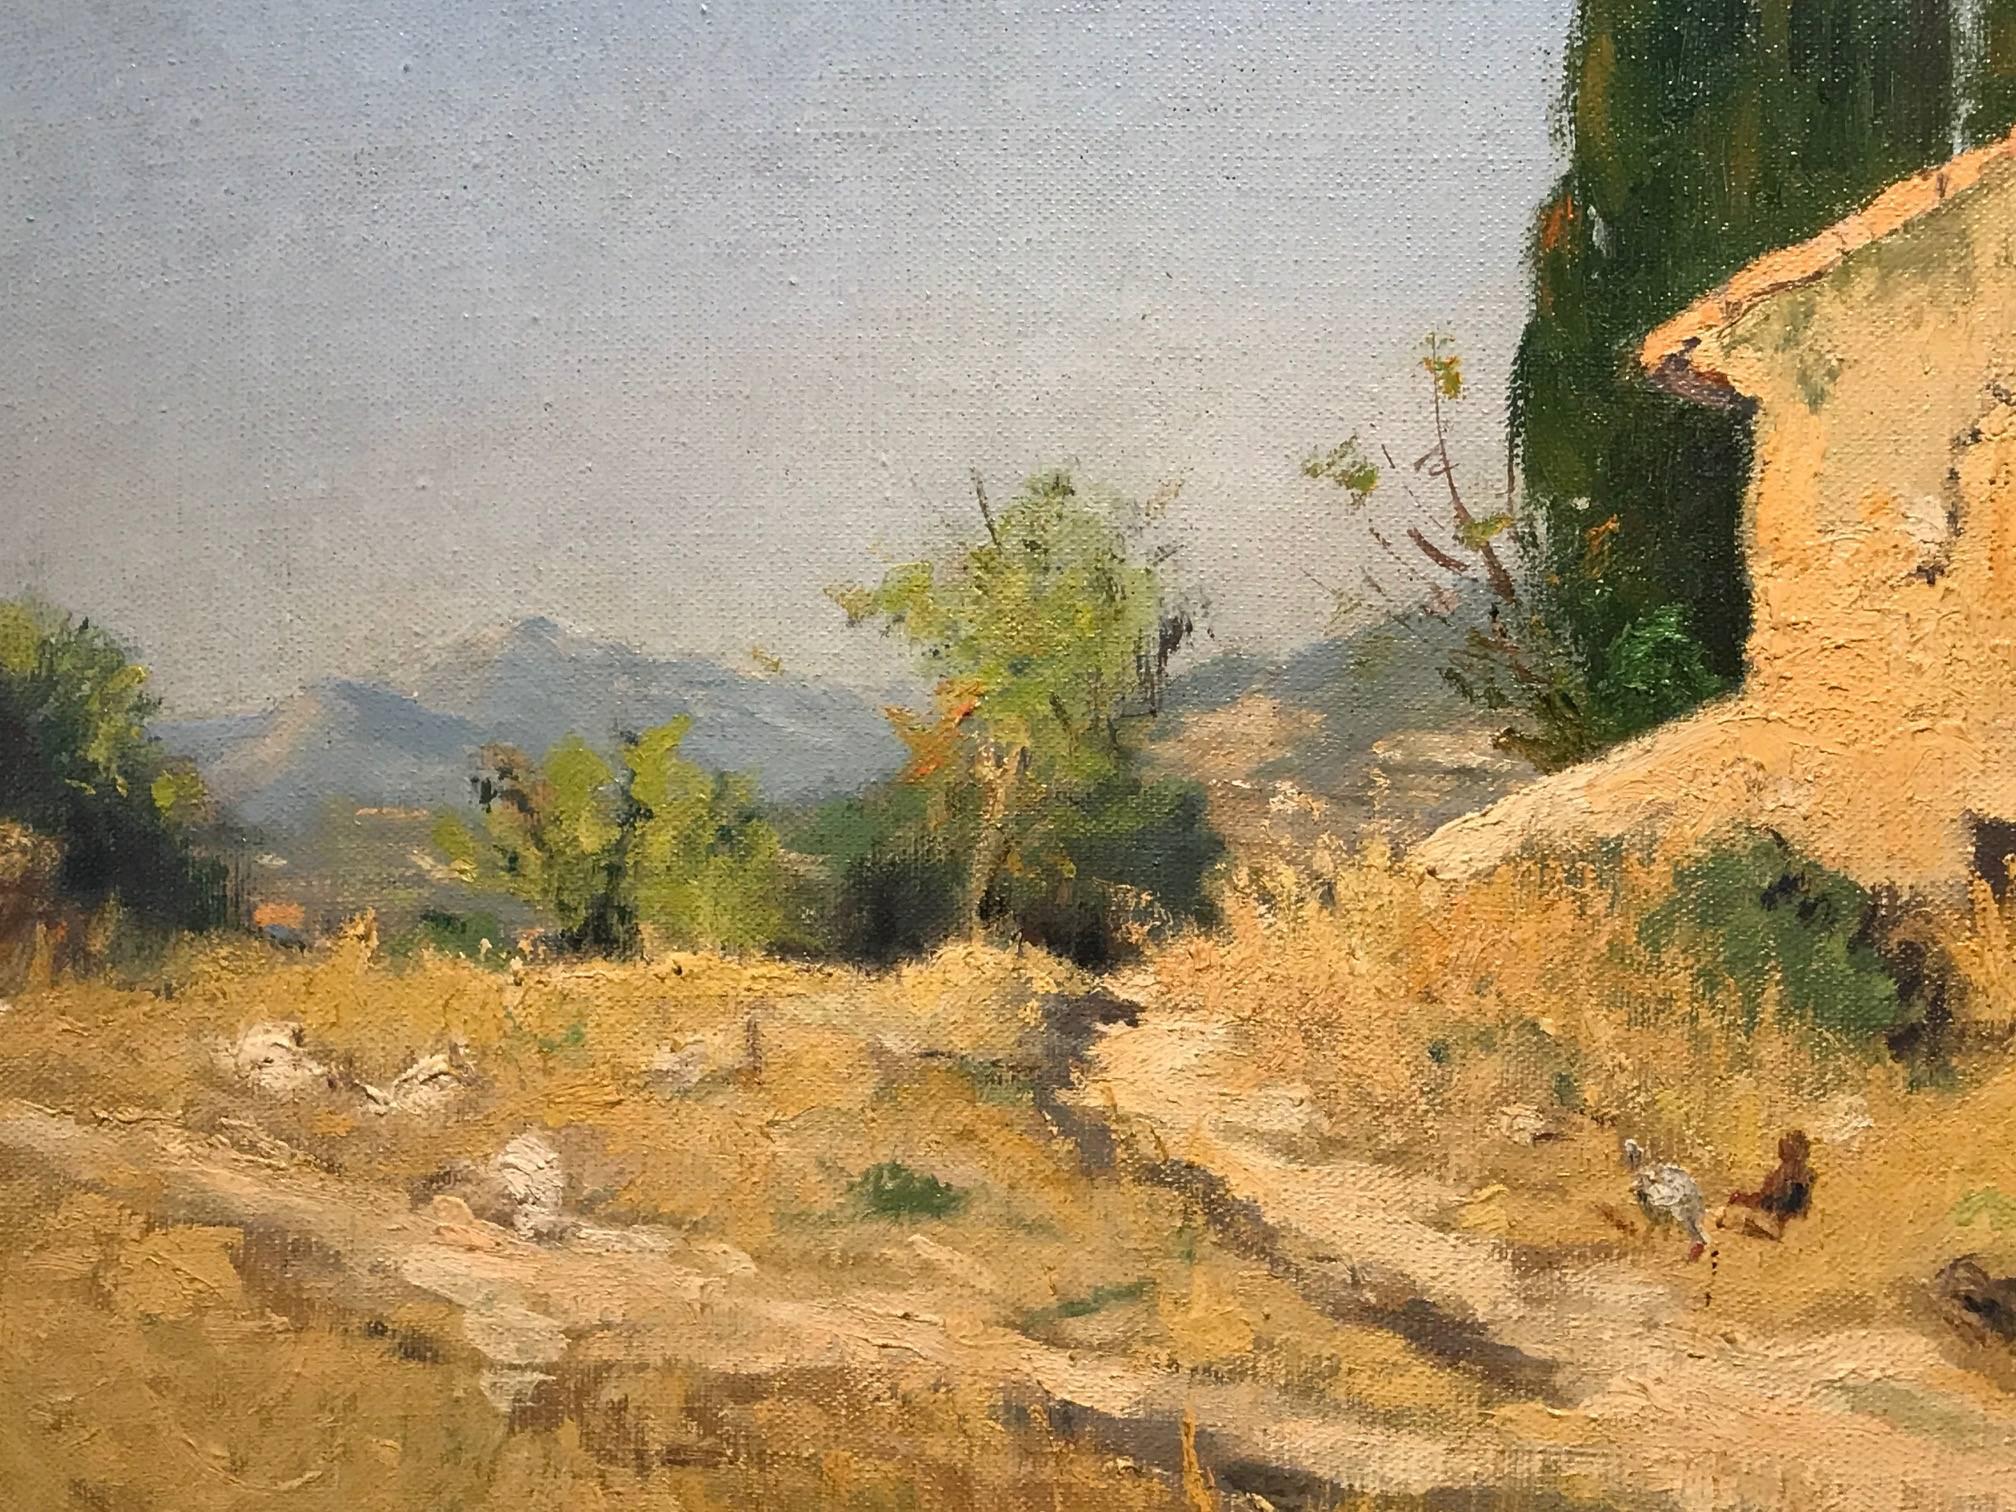 Lovely early 20th century French Impressionist oil painting on canvas. The painting dates to the 1930's period and is by the French artist, F. Portal-Pelissier (signed lower right). 

The painting wonderfully captures this warm, sun drenched